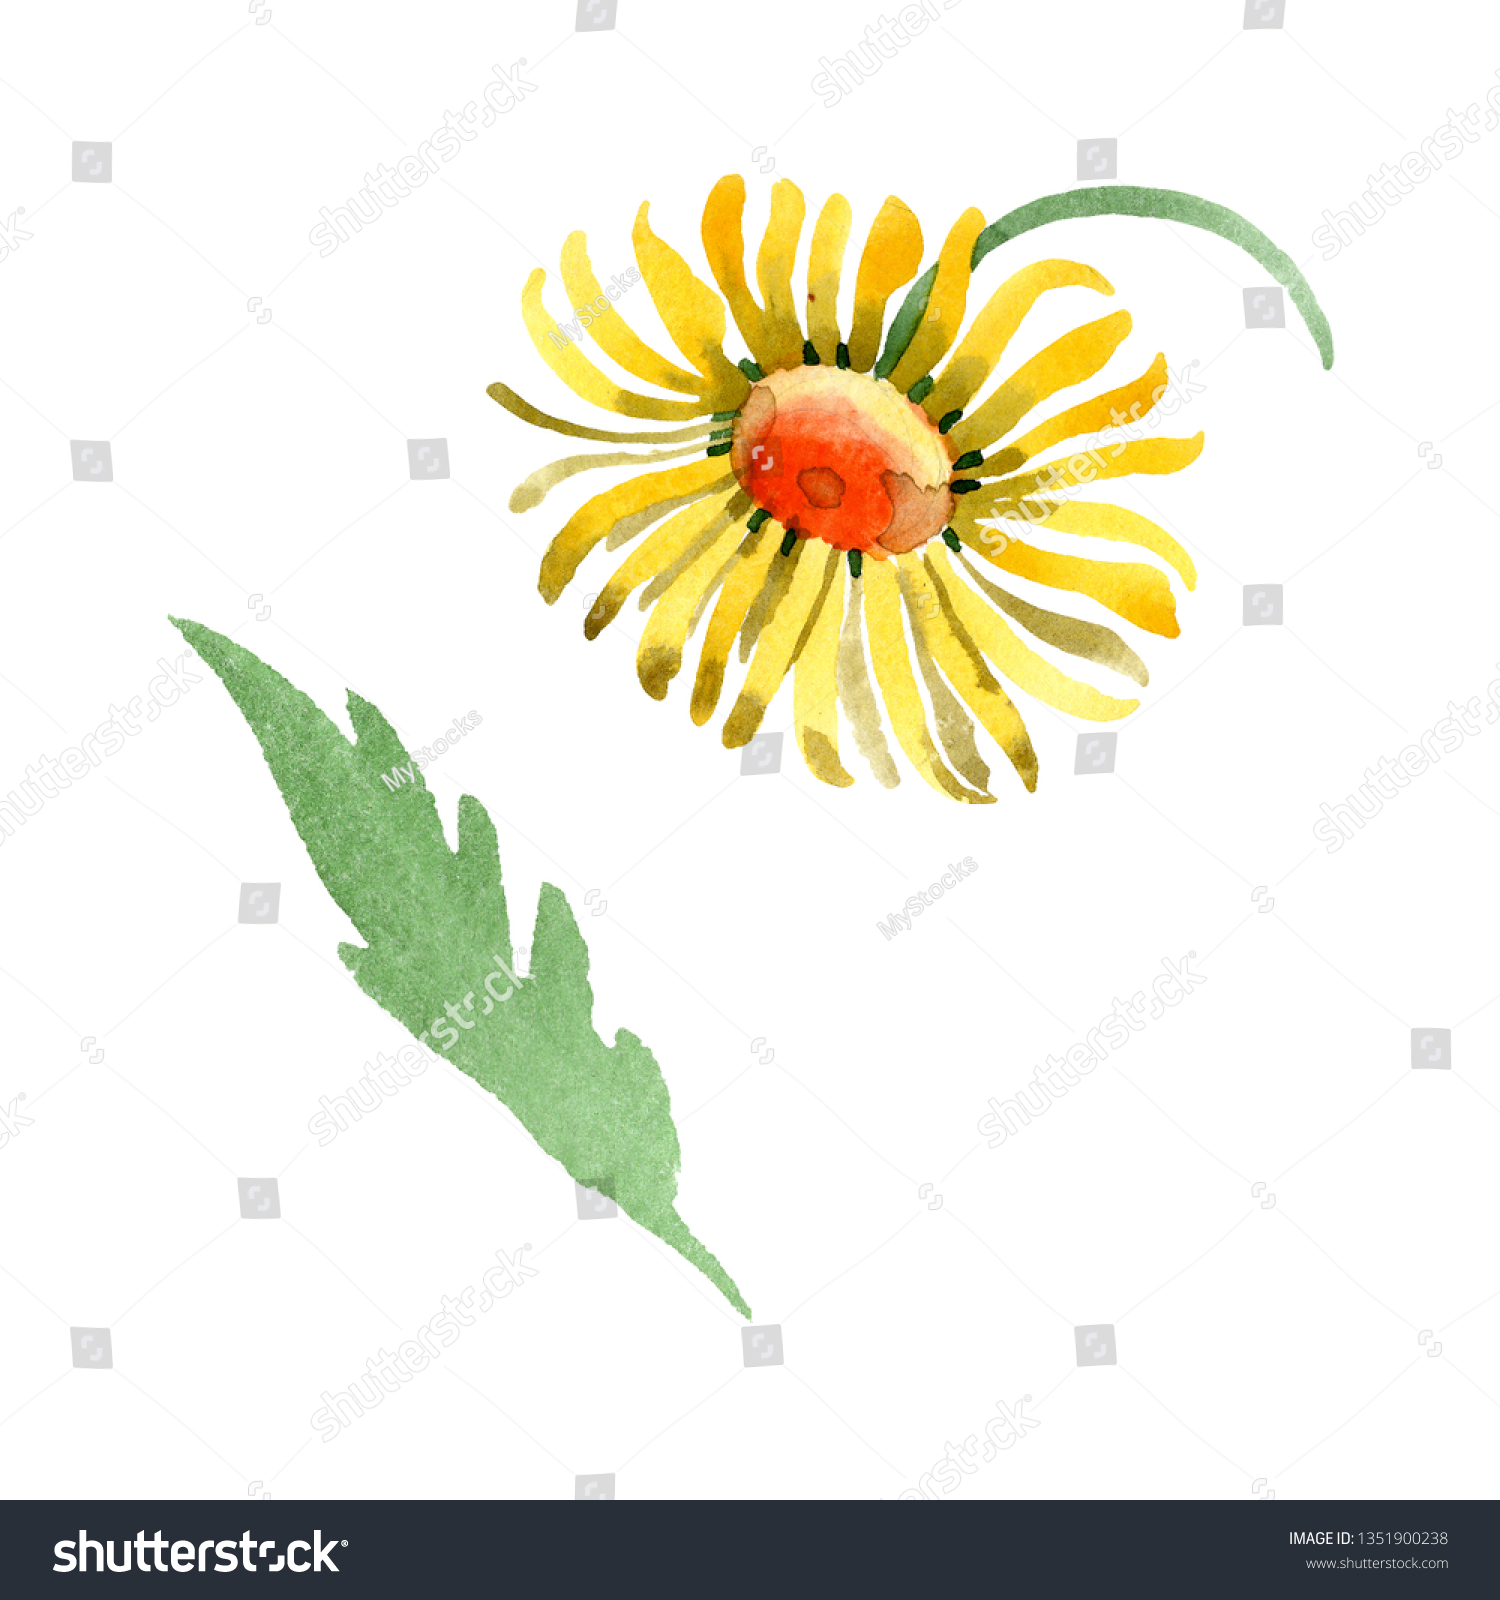 Yellow daisy floral botanical flower. Wild spring leaf wildflower isolated. Watercolor background illustration set. Watercolour drawing fashion aquarelle. Isolated daisybushes illustration element. #1351900238